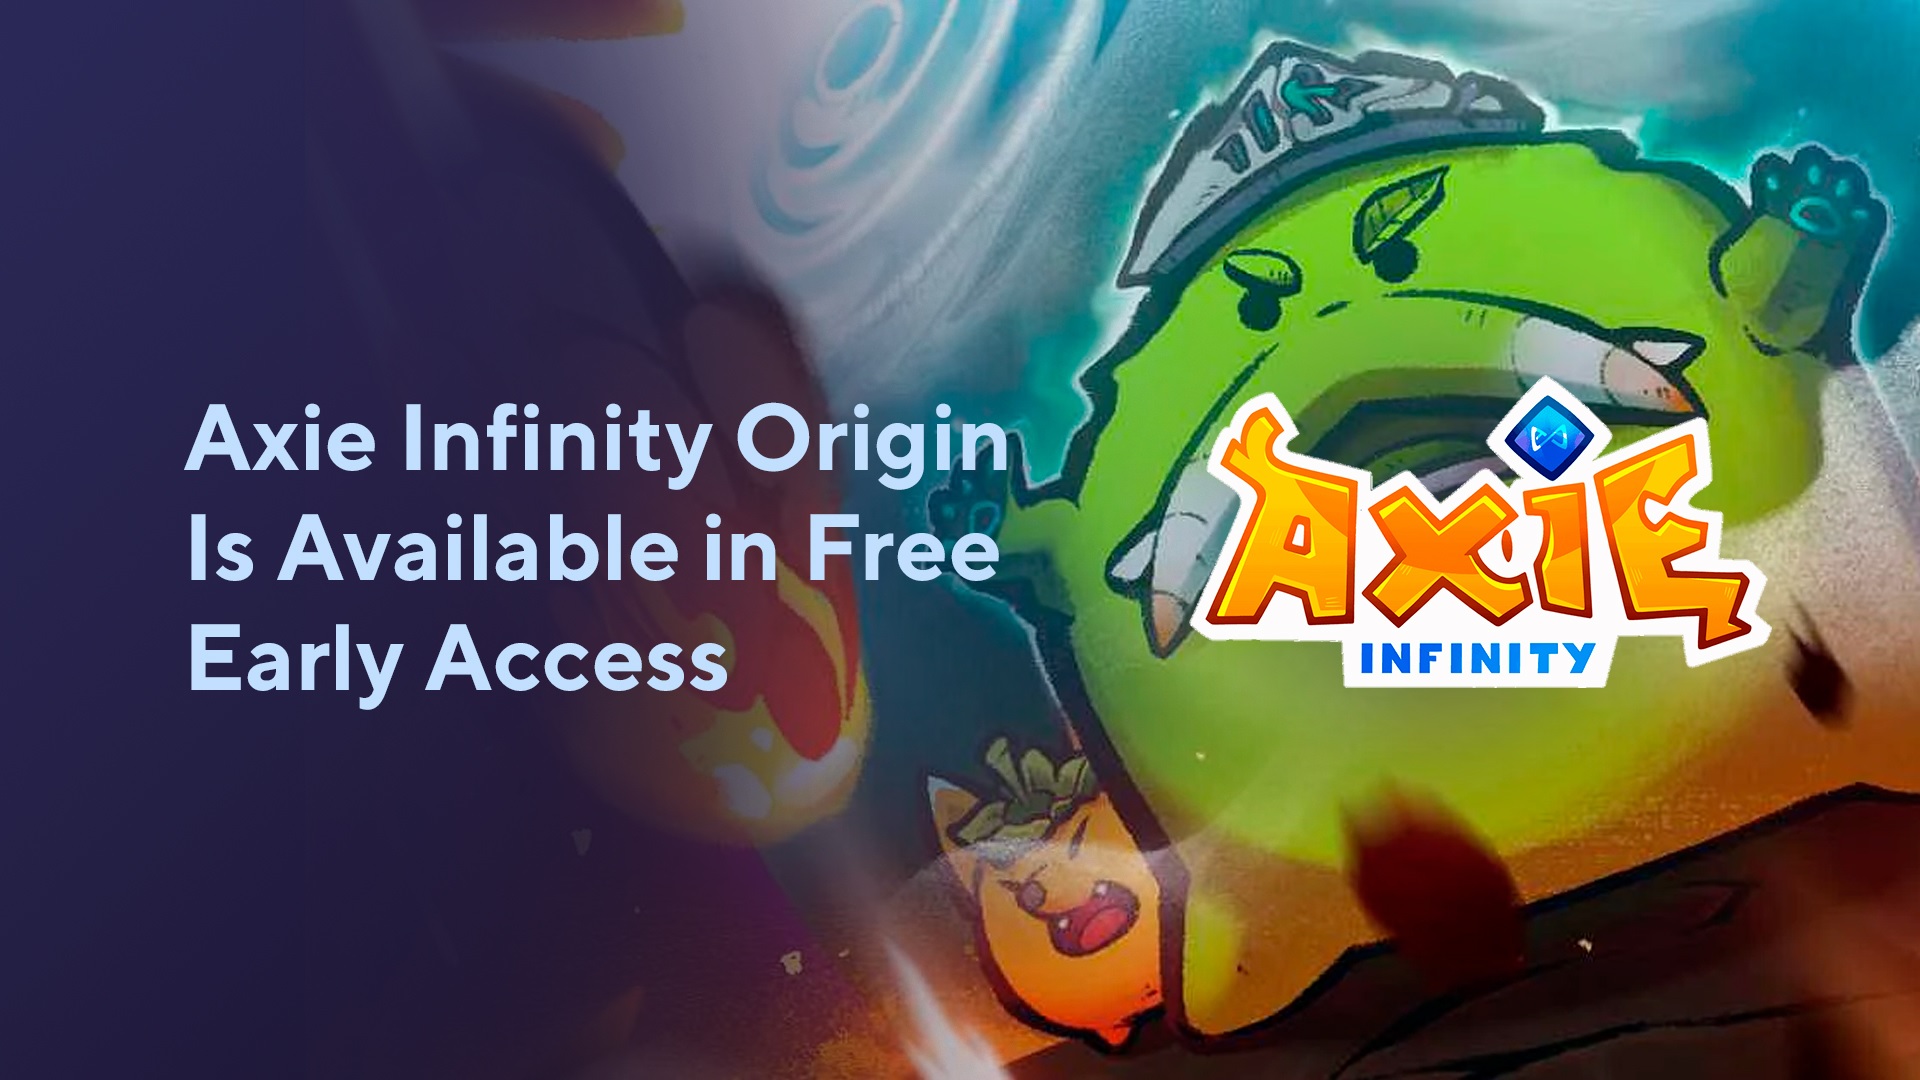 Axie Infinity Origin Is Available in Free Early Access